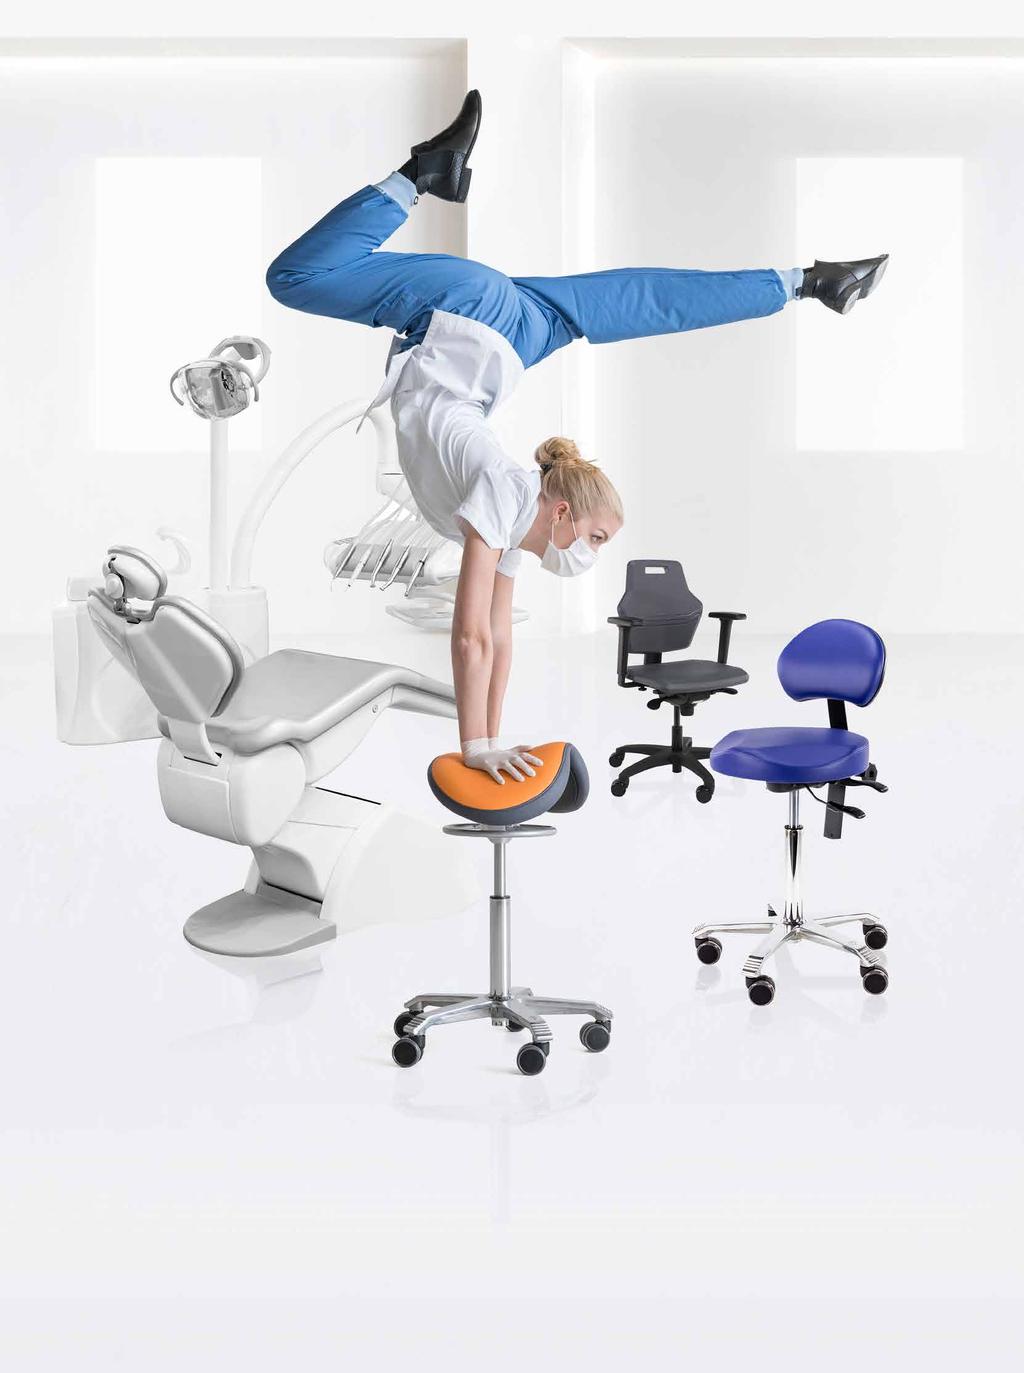 sit healthy, work comfortable As an oral healthcare professional, you don t have to put yourself in strange postures to